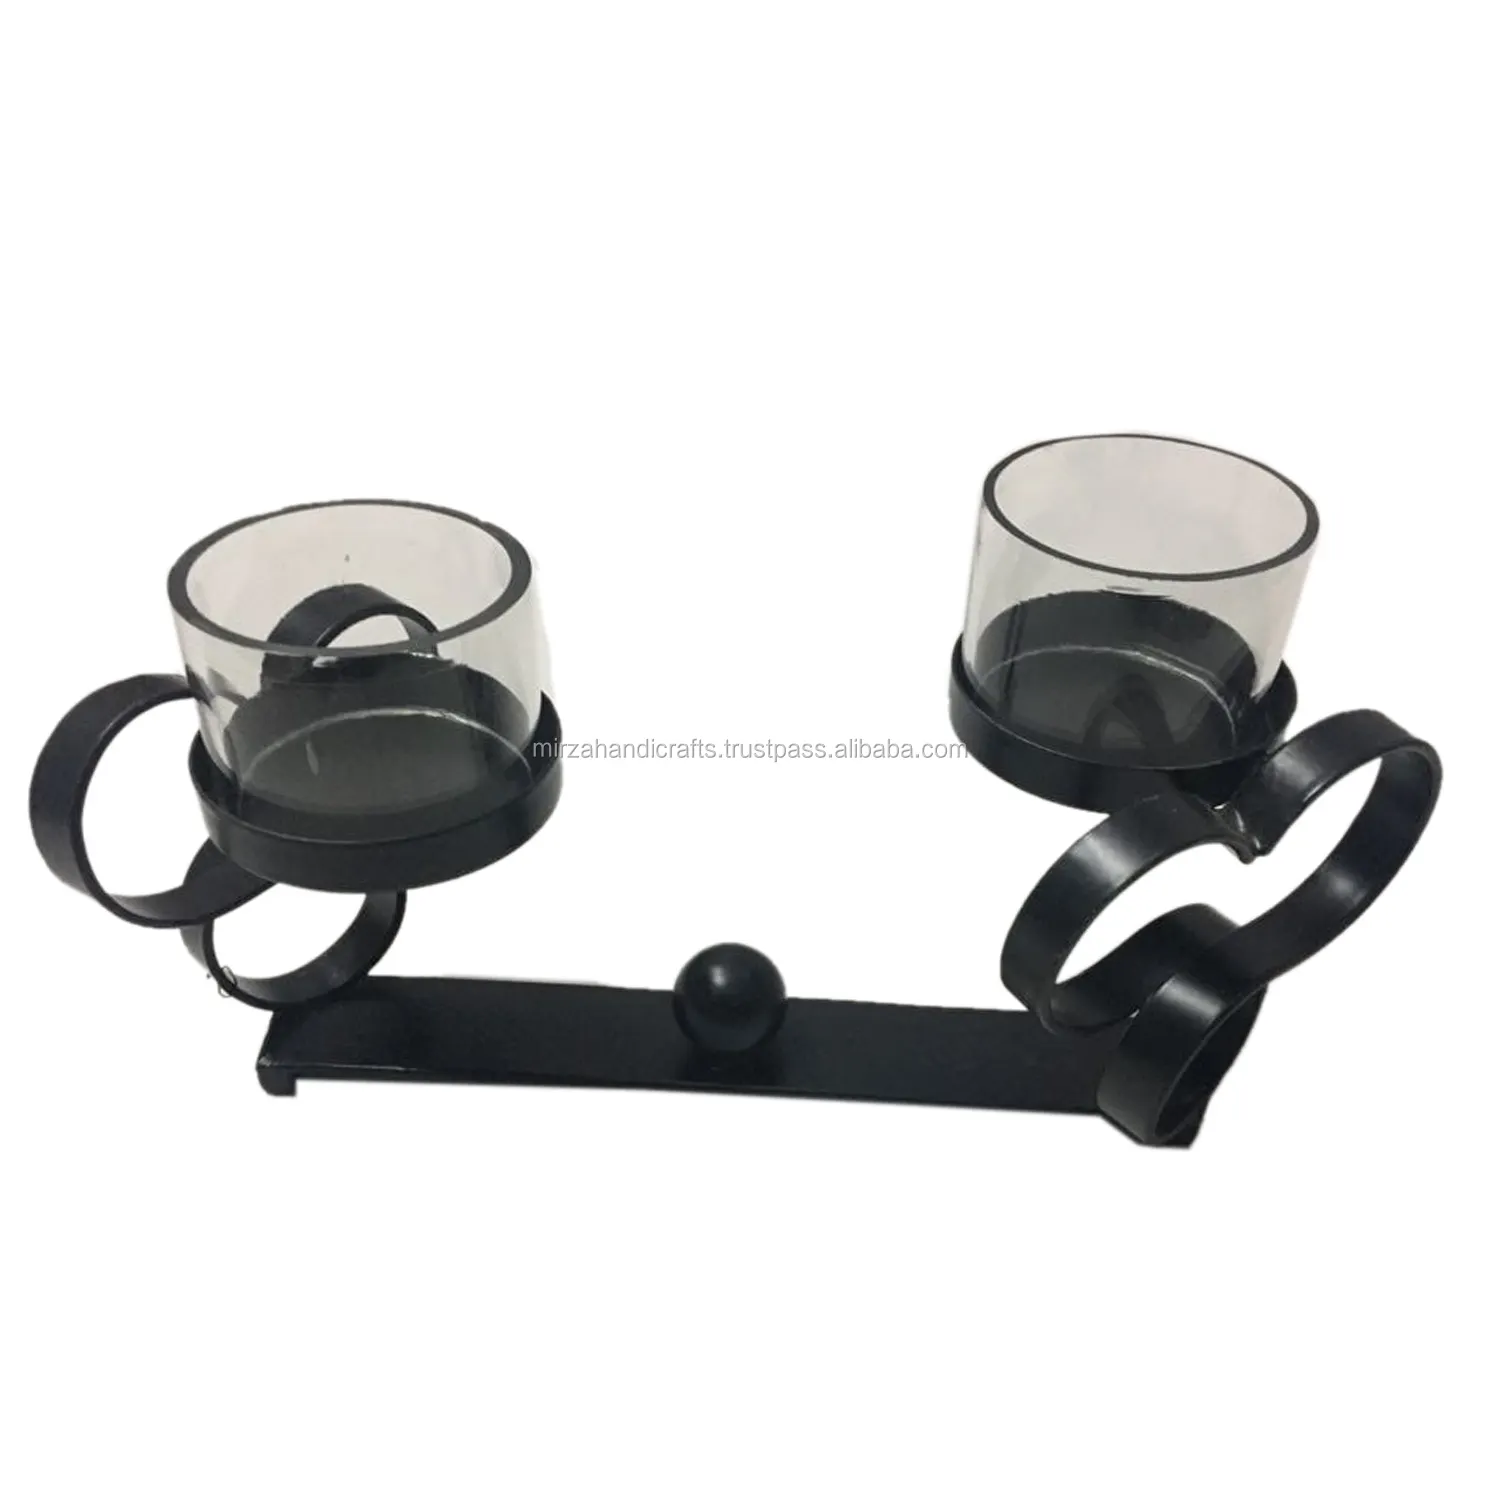 Wavy Iron and Glass Candle holder for Two Candles Home Living Room garden home decoration high quality